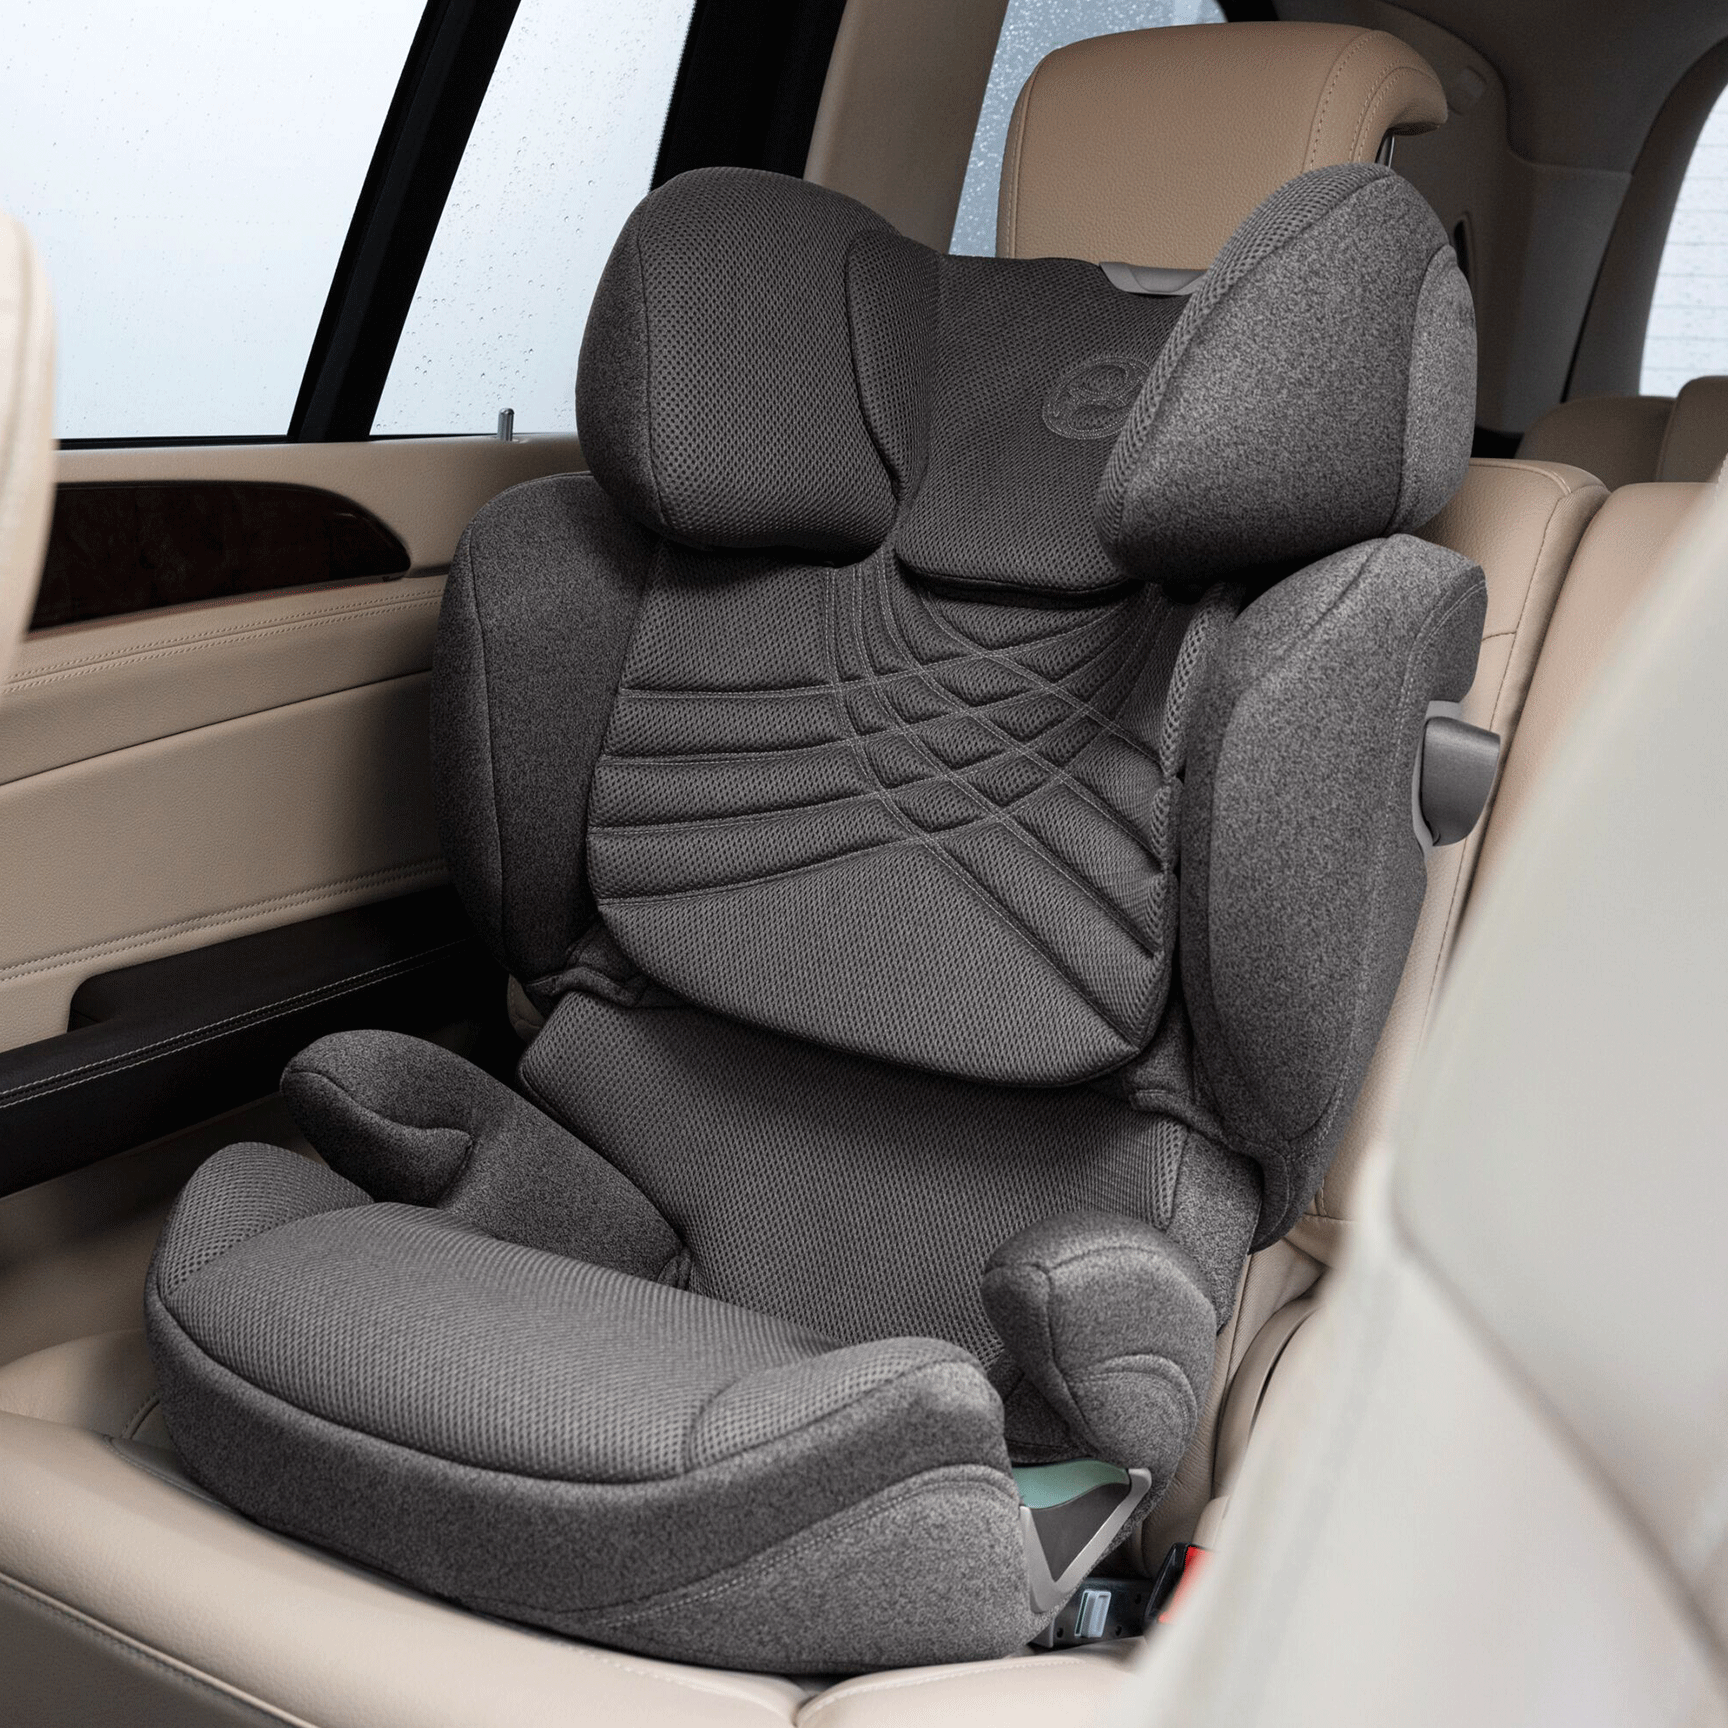 Cybex Solution T i-Fix in Mirage Grey Highback Booster Seats 522004120 4063846380596